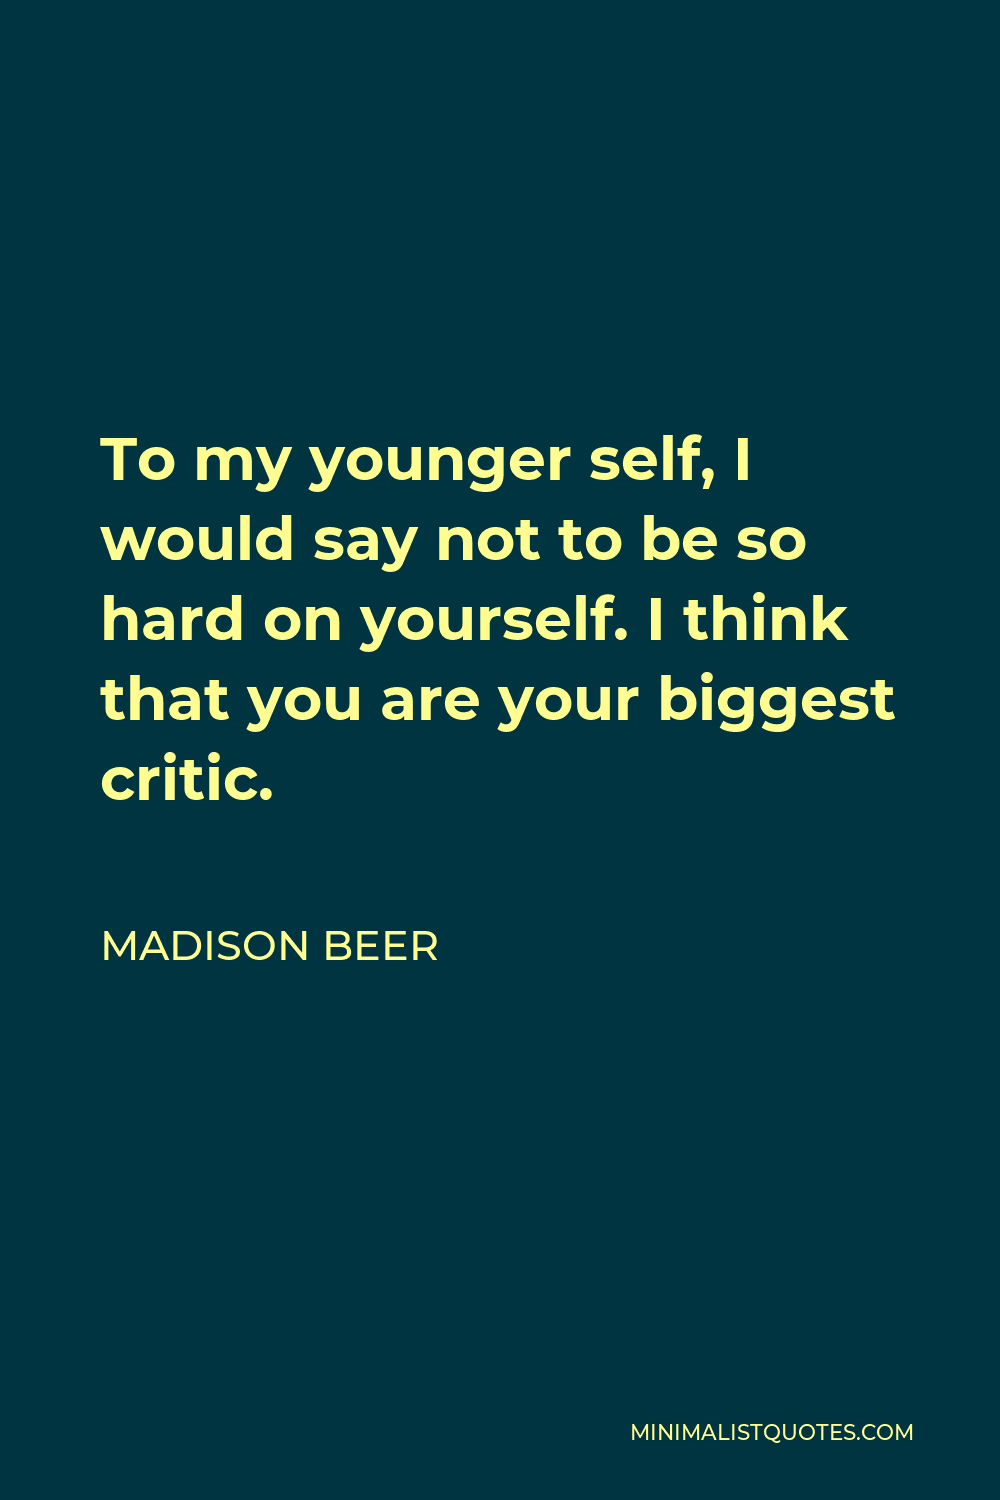 Madison Beer Quote - To my younger self, I would say not to be so hard on yourself. I think that you are your biggest critic.